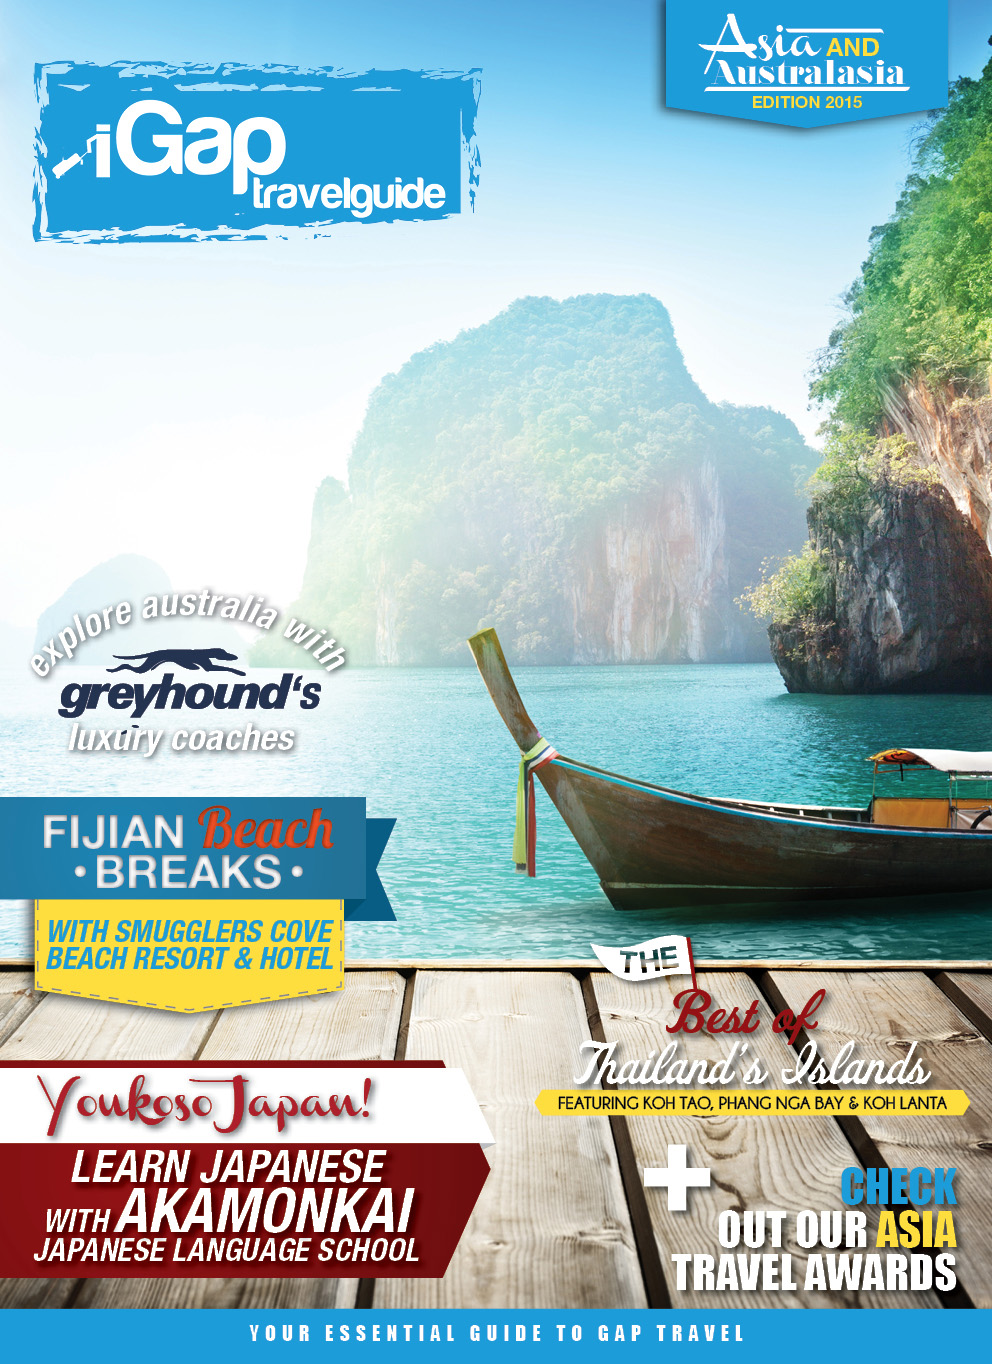 The iGap Travel Guide: Asia & Australasia 2015 - Cover Image